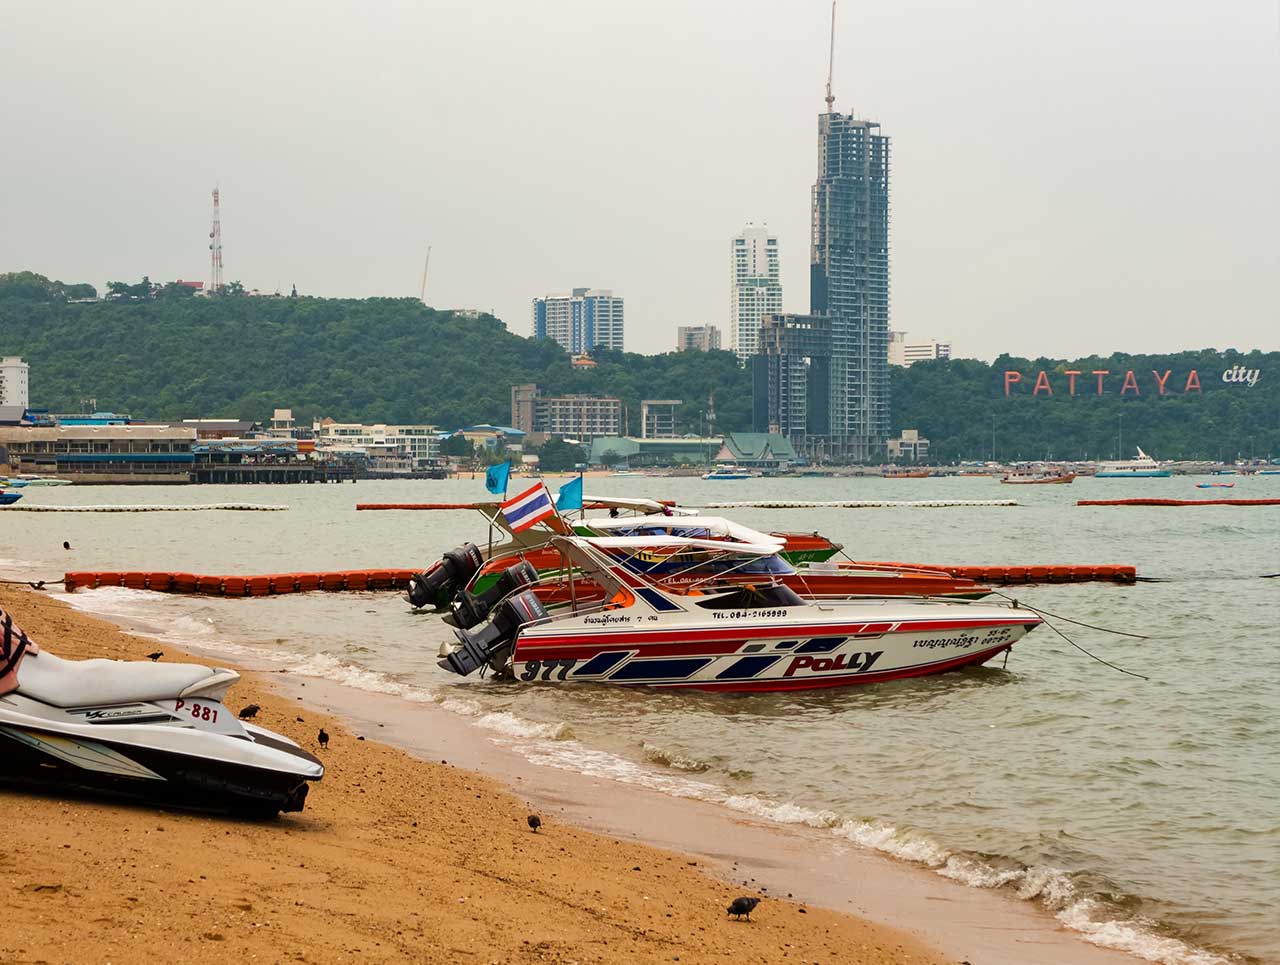 How to Stay Longer in Pattaya